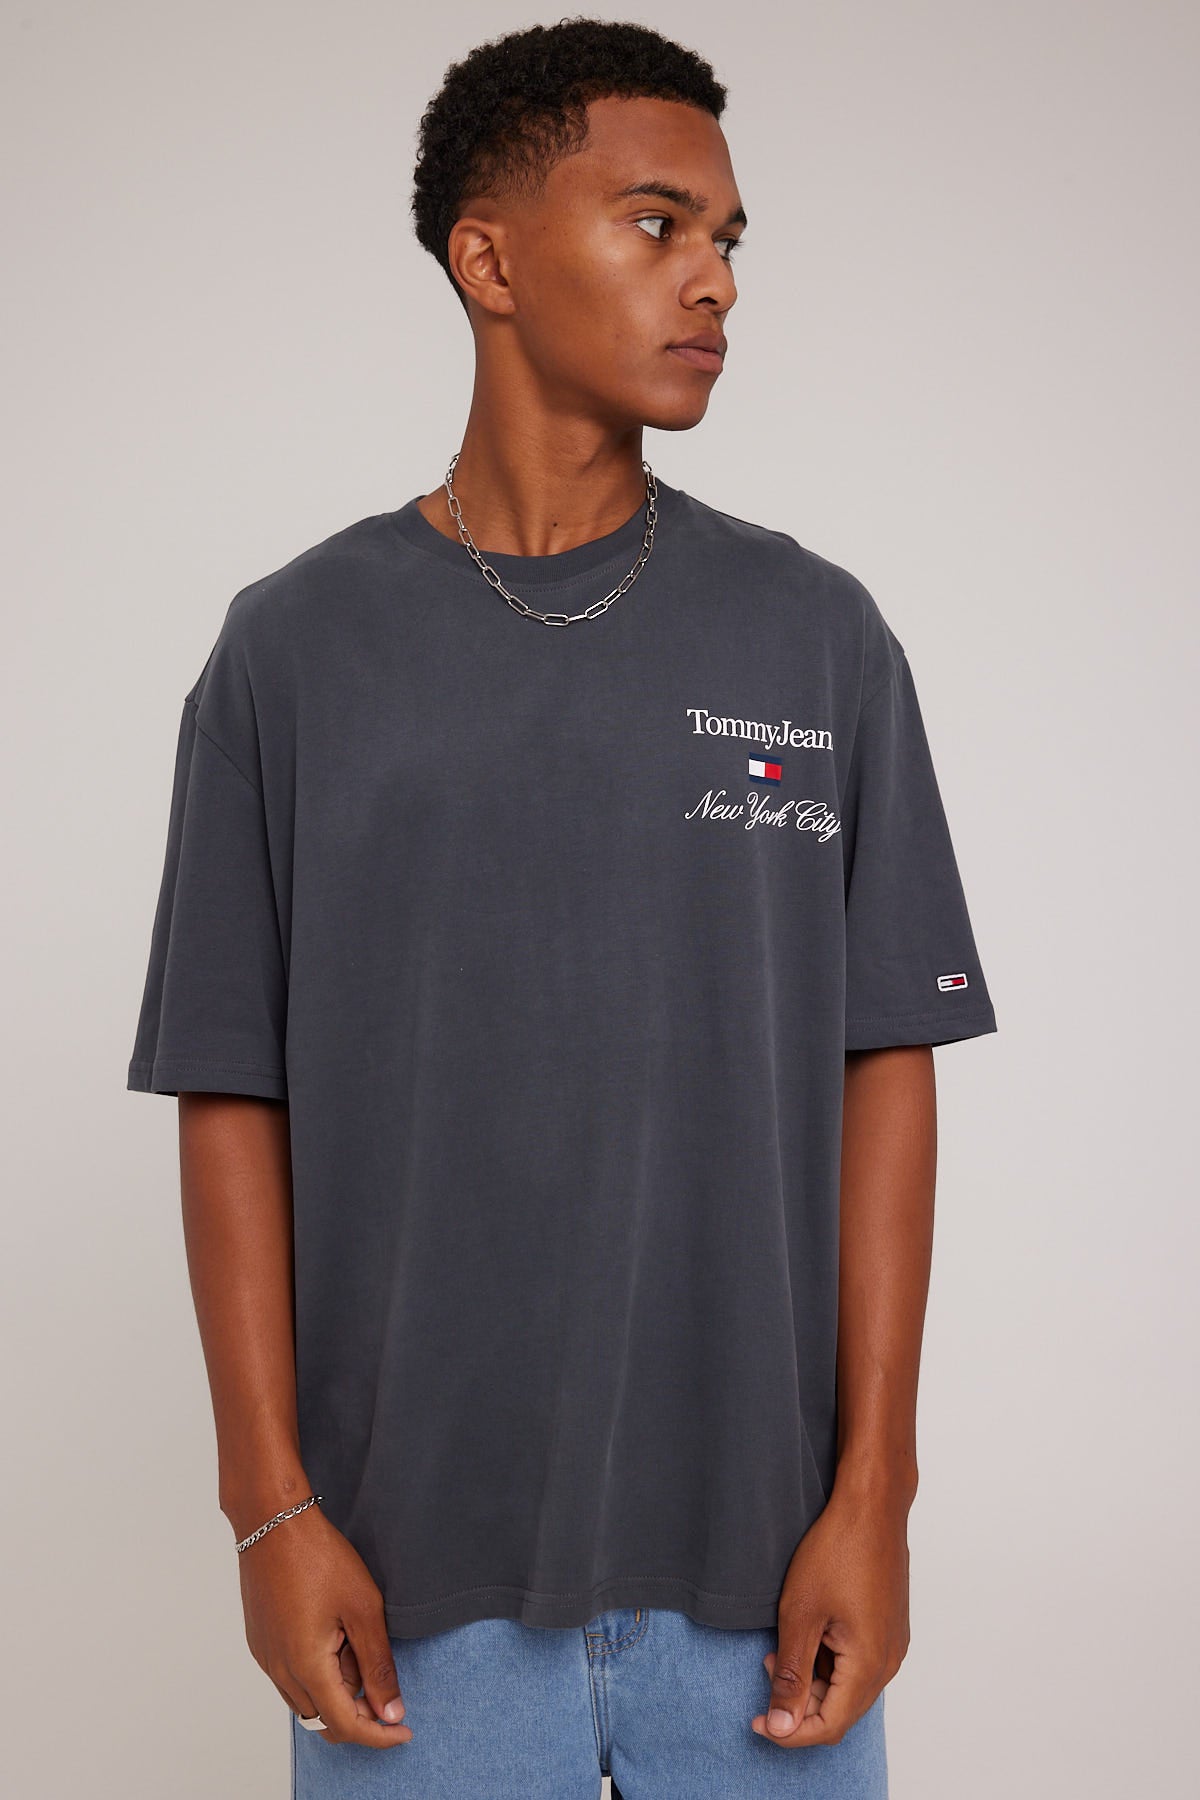 Tommy Jeans TJM SKT Luxe Athletic 2 Tee New Charcoal